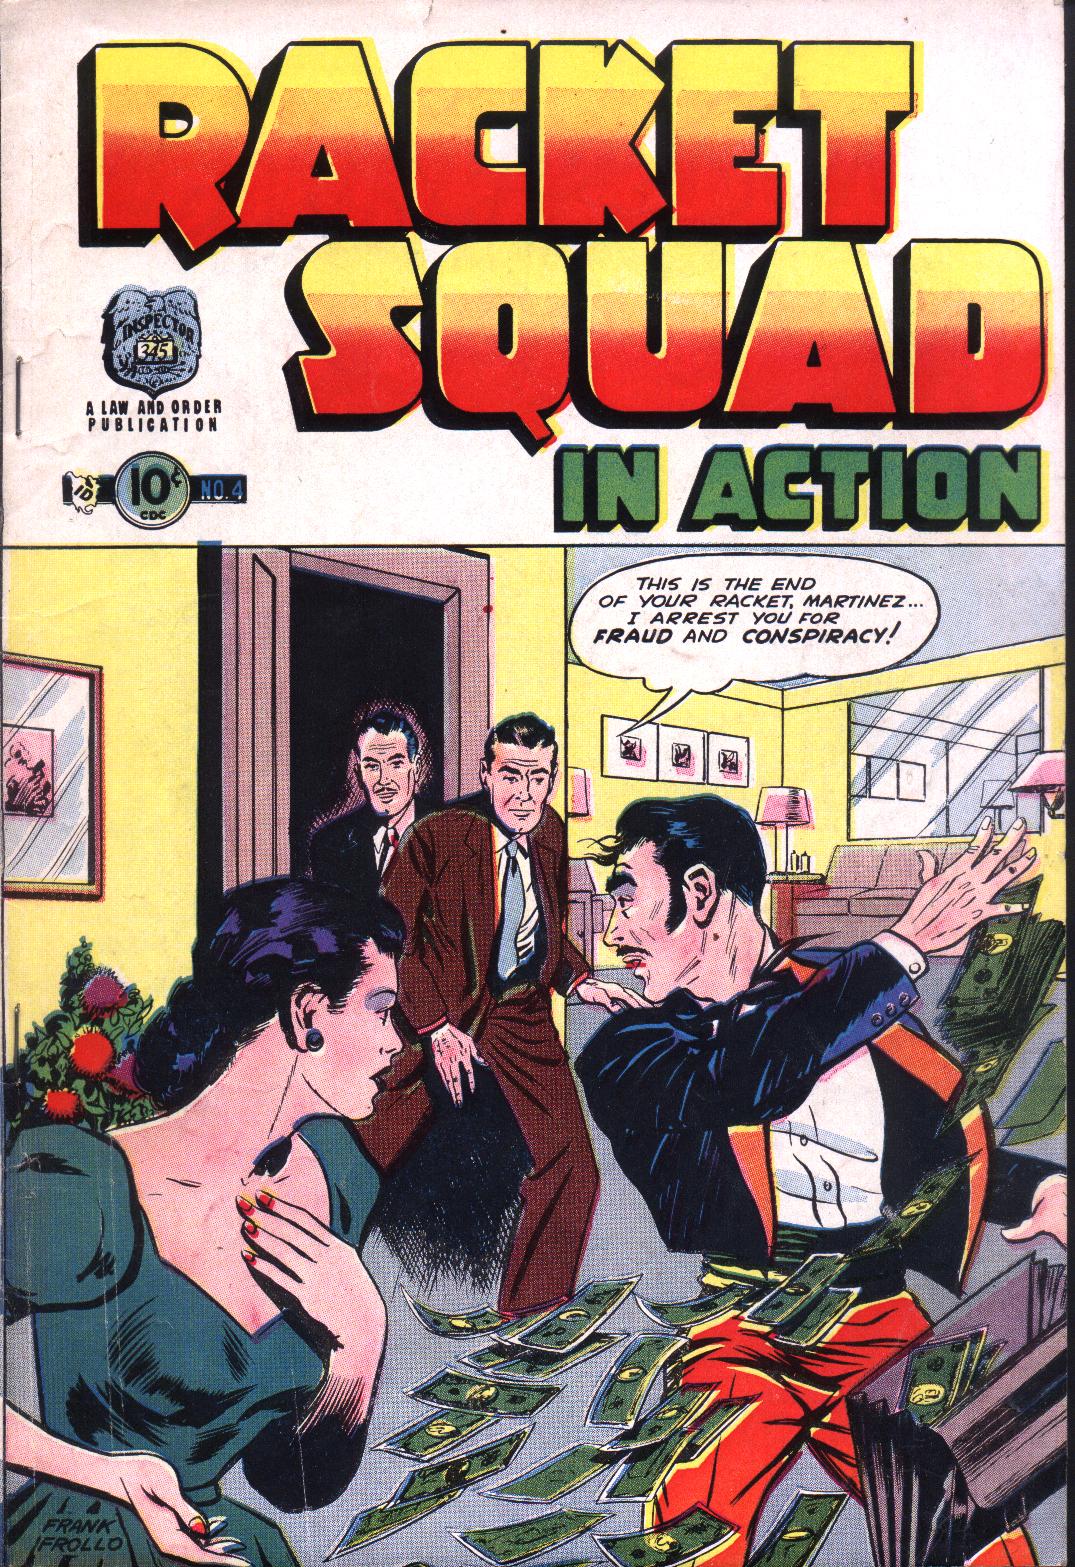 Read online Racket Squad in Action comic -  Issue #4 - 1